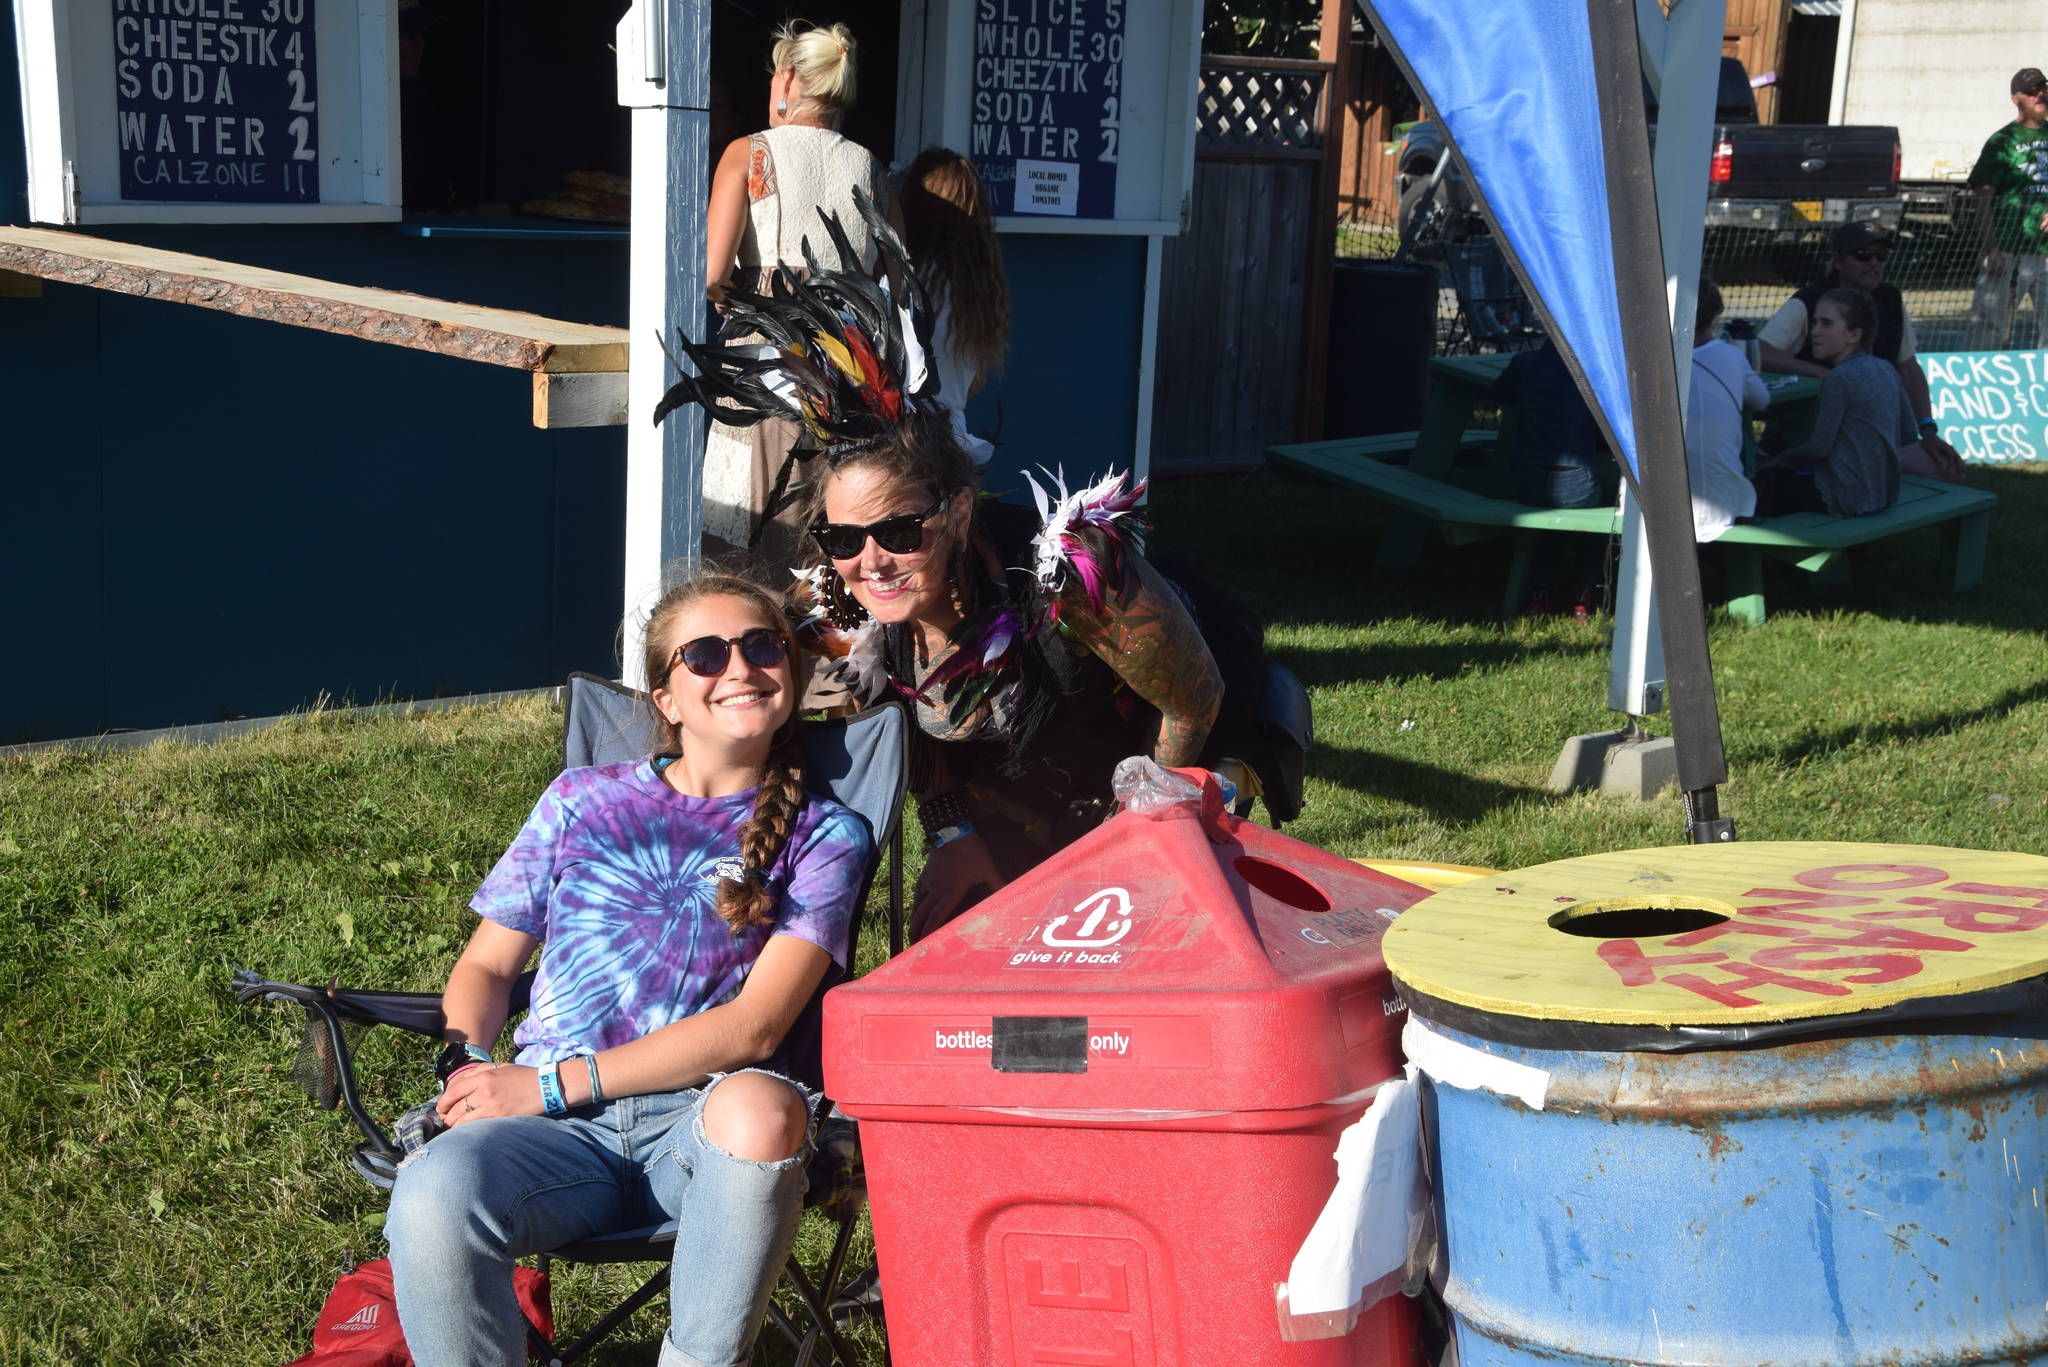 Rosie Skovron, left, and a Salmonfest attendee smile for the camera at one of the waste disposal stations during Salmonfest 2019 in Ninilchik, Alaska on August 2, 2019. Skovron is a volunteer for the Zero Waste project and an intern at Cook Inletkeeper. (Photo by Brian Mazurek/Peninsula Clarion)